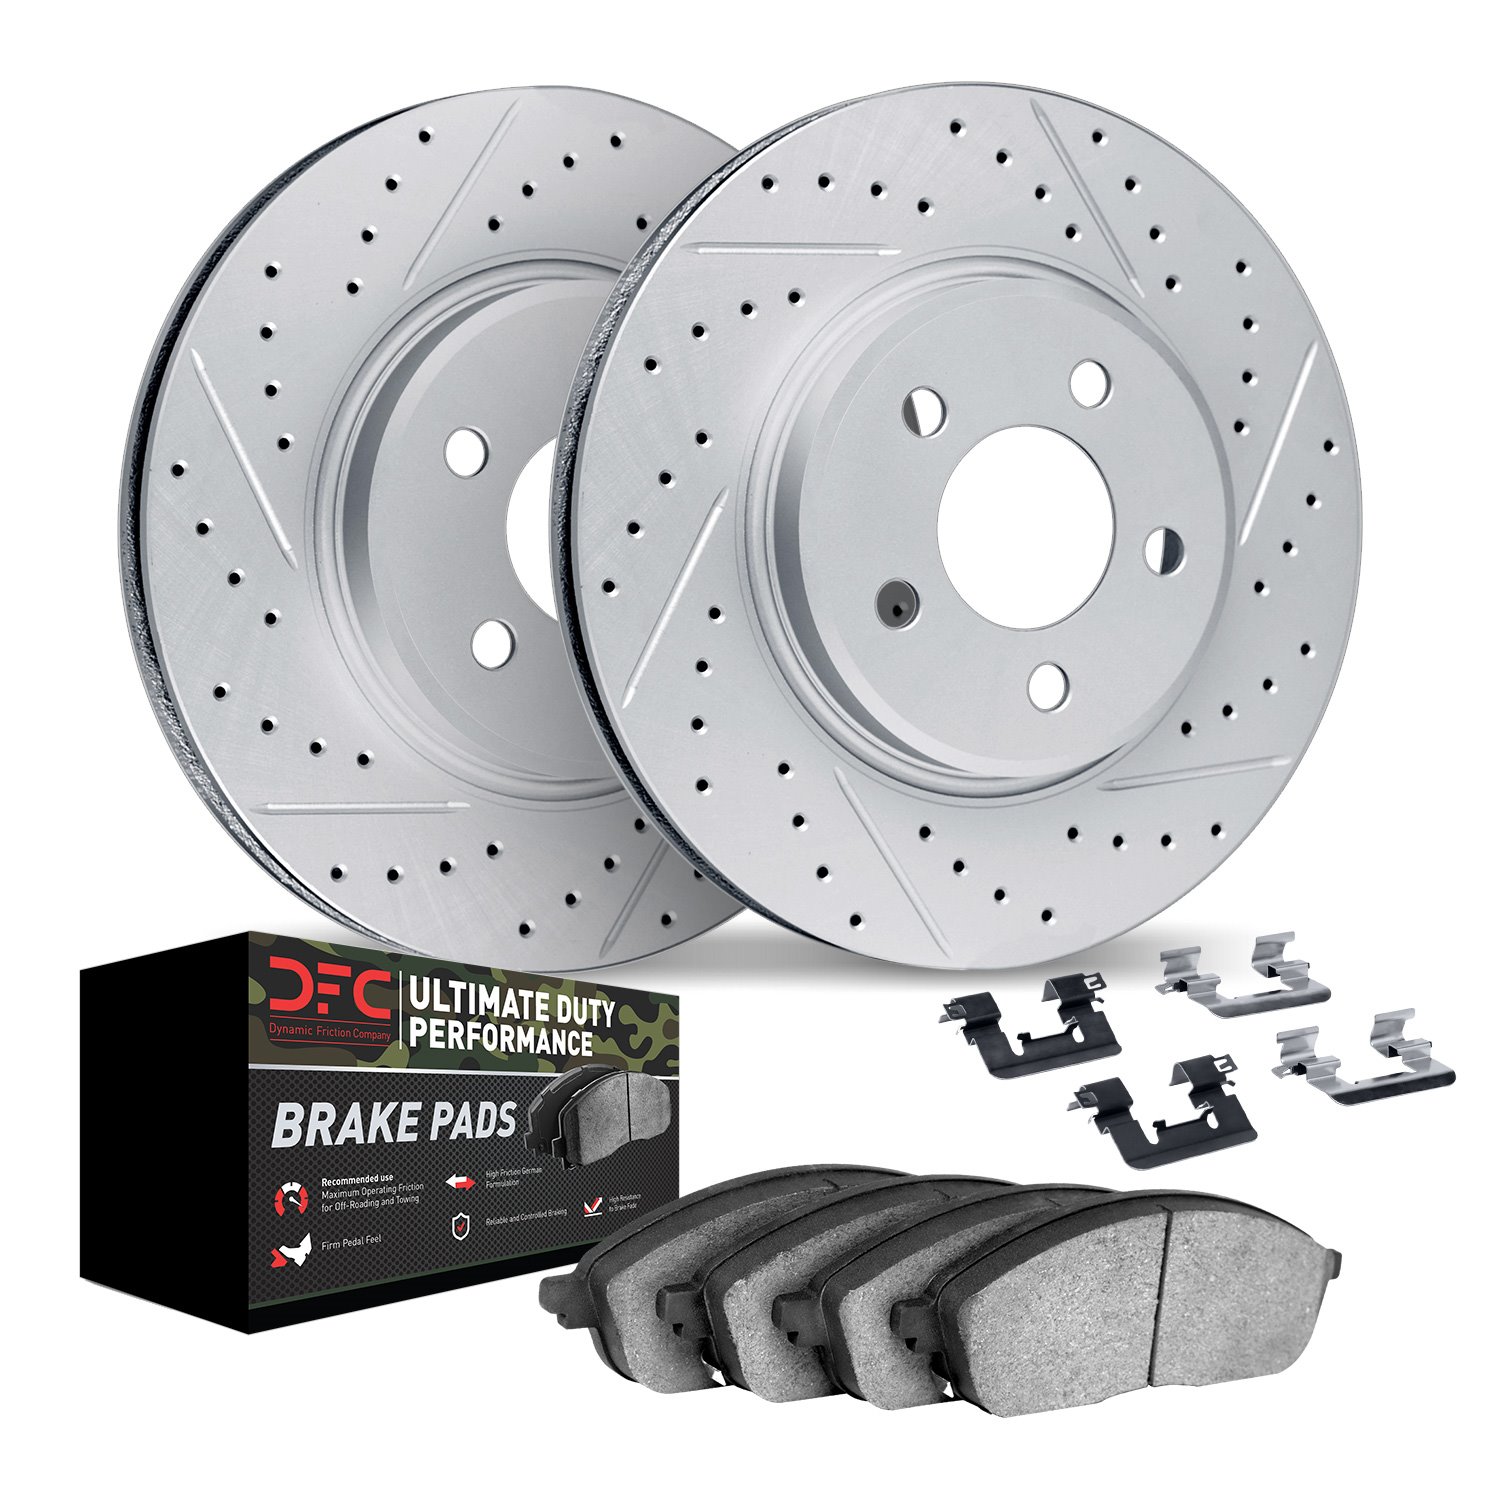 2412-47003 Geoperformance Drilled/Slotted Brake Rotors with Ultimate-Duty Brake Pads Kit & Hardware, Fits Select GM, Position: R